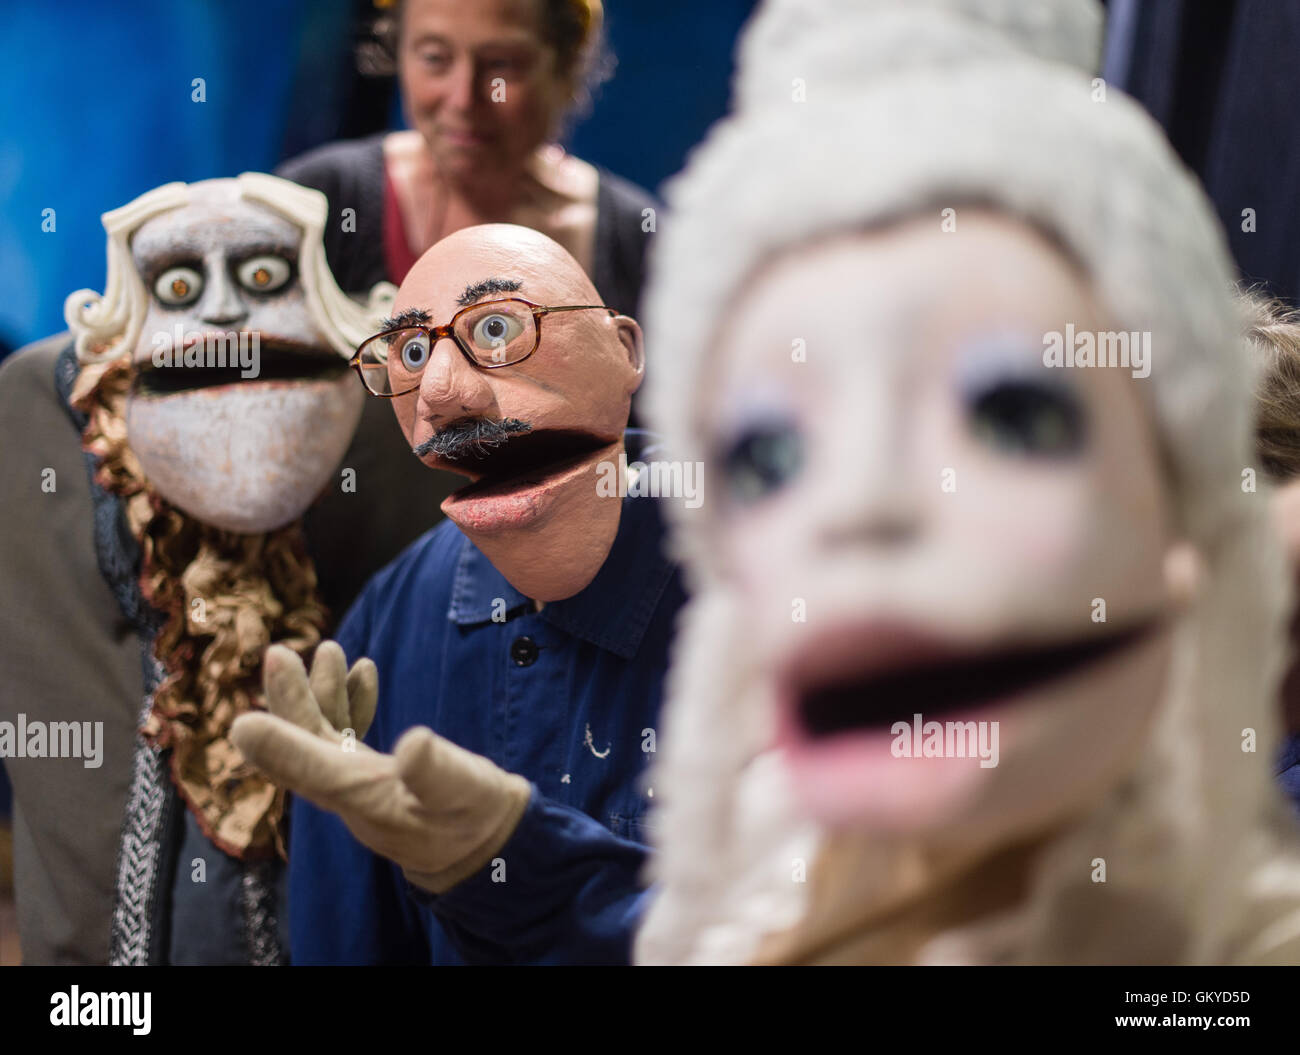 Northeim, Germany. 23rd Aug, 2016. The puppets Herr Heidegger (l-r), animated by Ruth Brockhausen, Herr Kasurke, animated by Heiko Brockhausen, and Mary, animated by Oliver Koehler at the Theatre der Nacht in Northeim, Germany, 23 August 2016. During a conference lasting from 29 August to 4 September 2016, puppeteers meet from all over Germany meet for courses, workshops and theater performances with different puppet types. Photo: Sebastian Gollnow/dpa/Alamy Live News Stock Photo